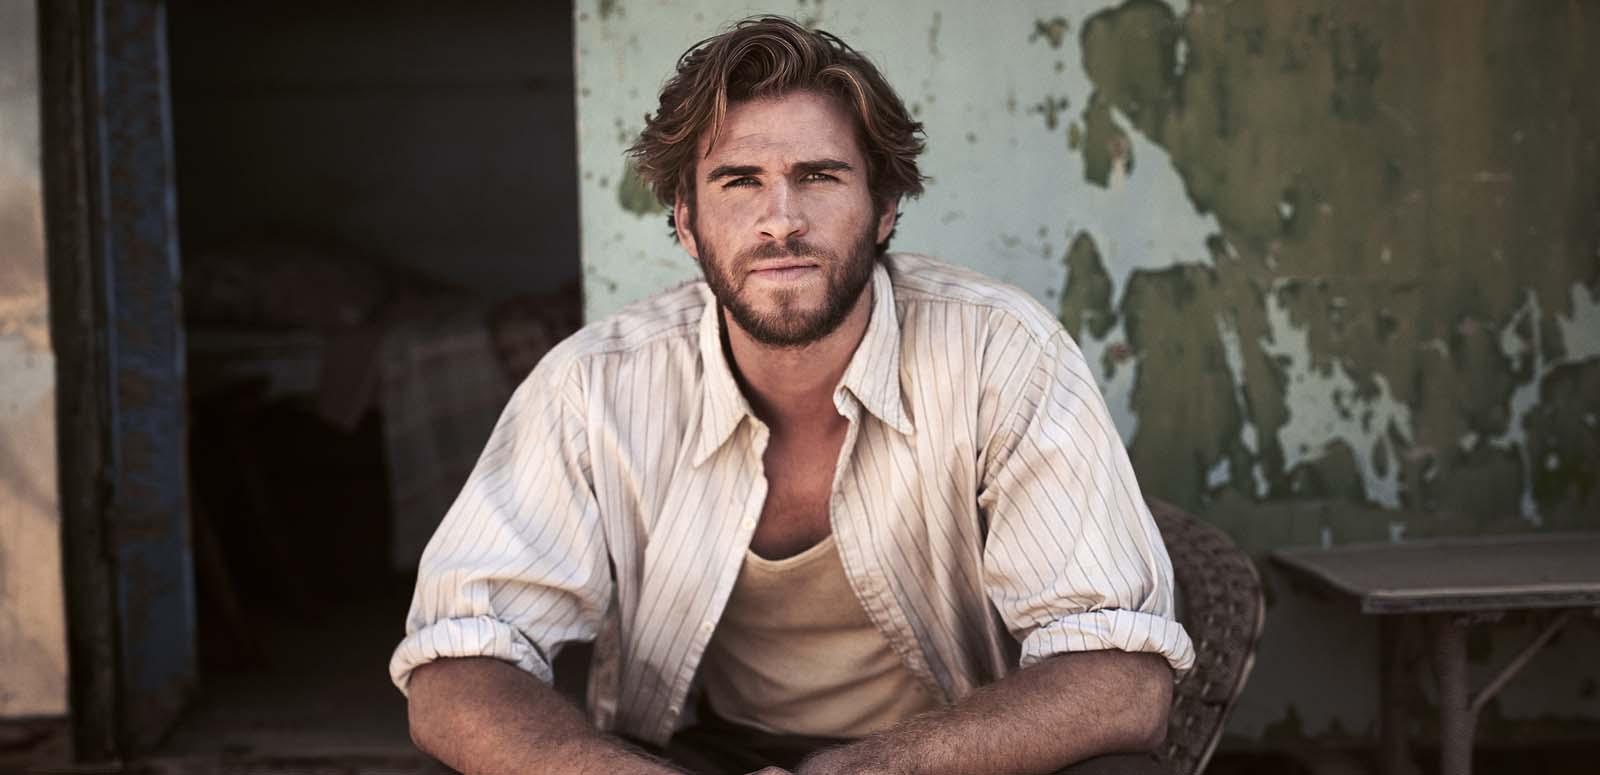 Liam Hemsworth in The Dressmaker, seated in a chair on a verandah in front of a faded wall